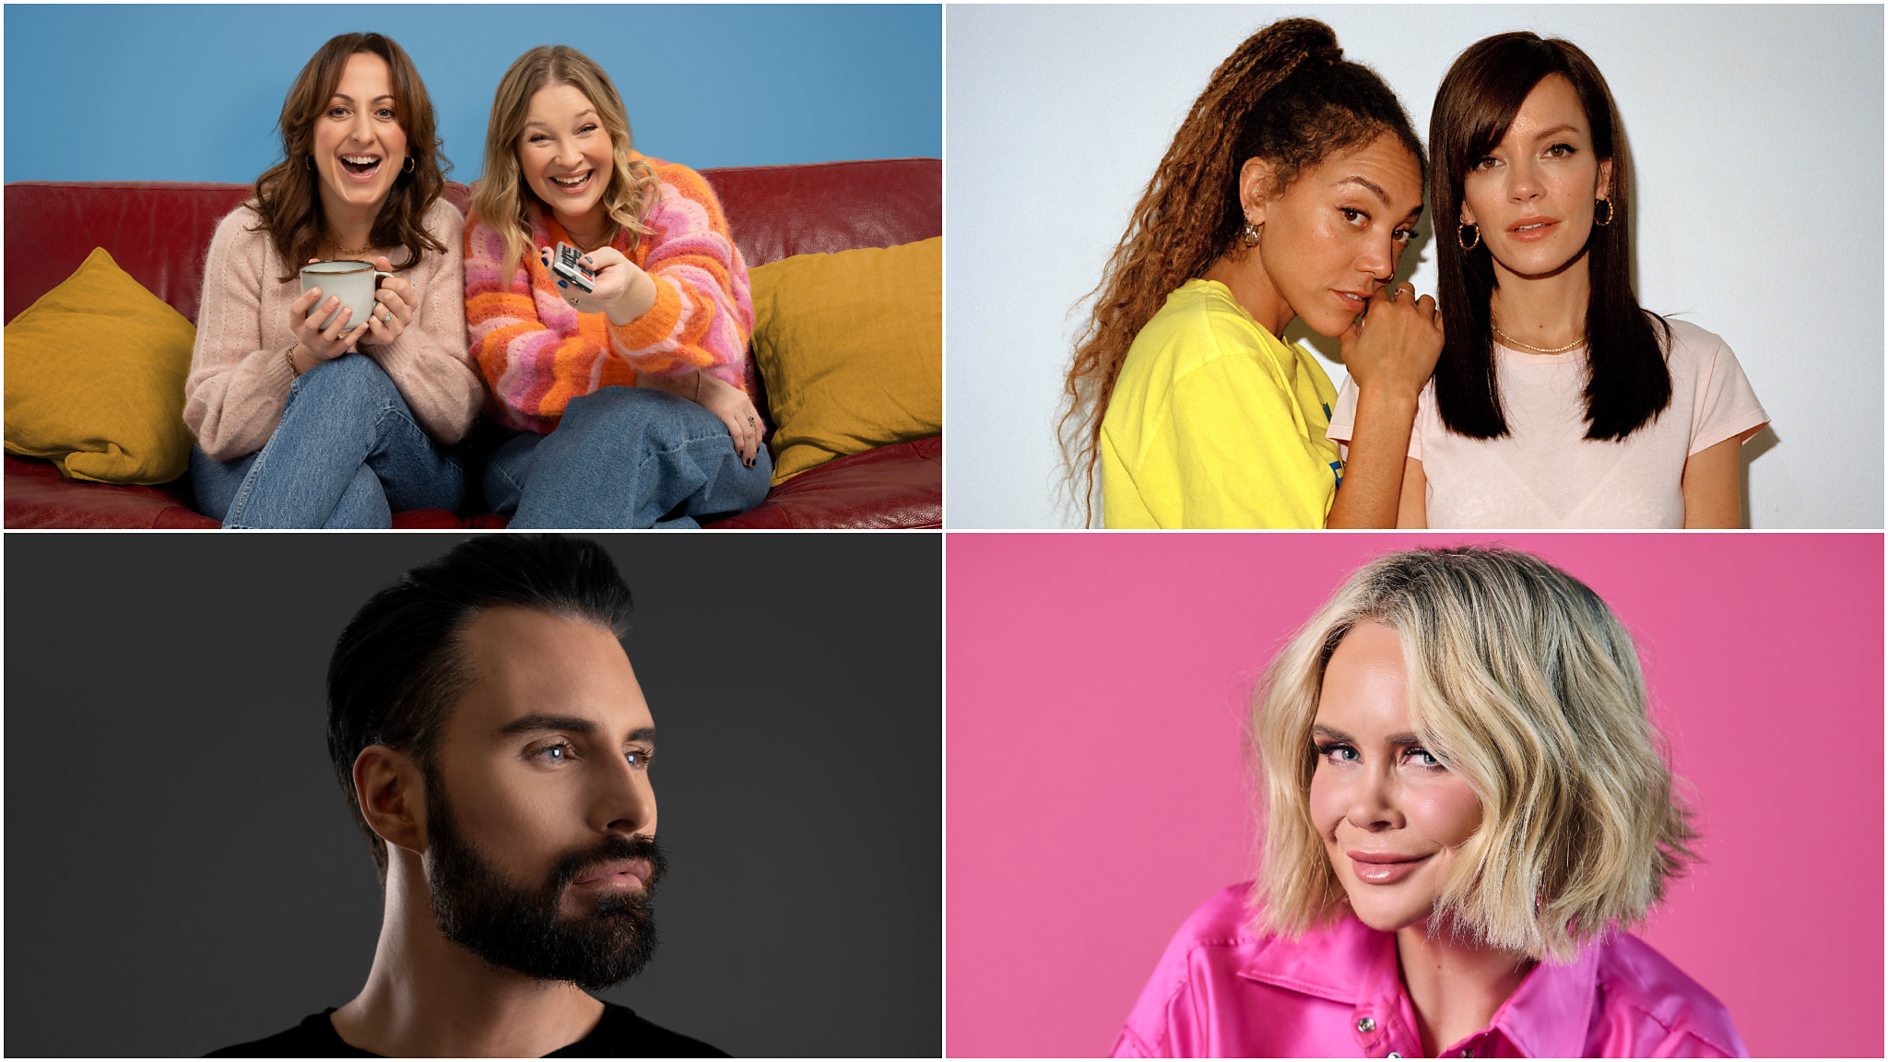 New podcasts from Lily Allen, Miquita Oliver, Natalie Cassidy, Joanna Page and Nicola Coughlan